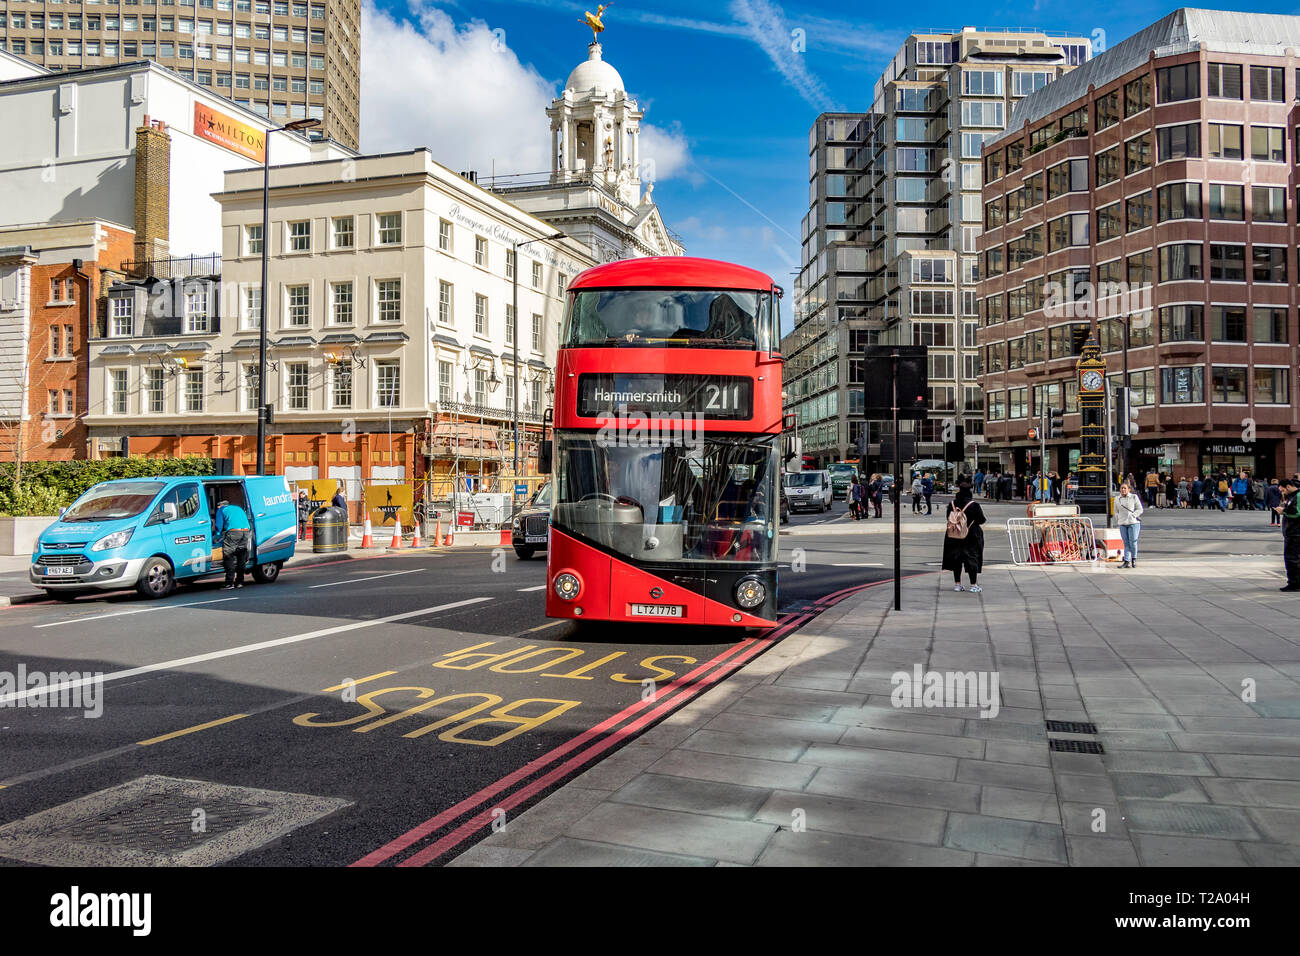 London Bus 211 on it's way to Hammersmith at Victoria St, London SW1 Stock Photo